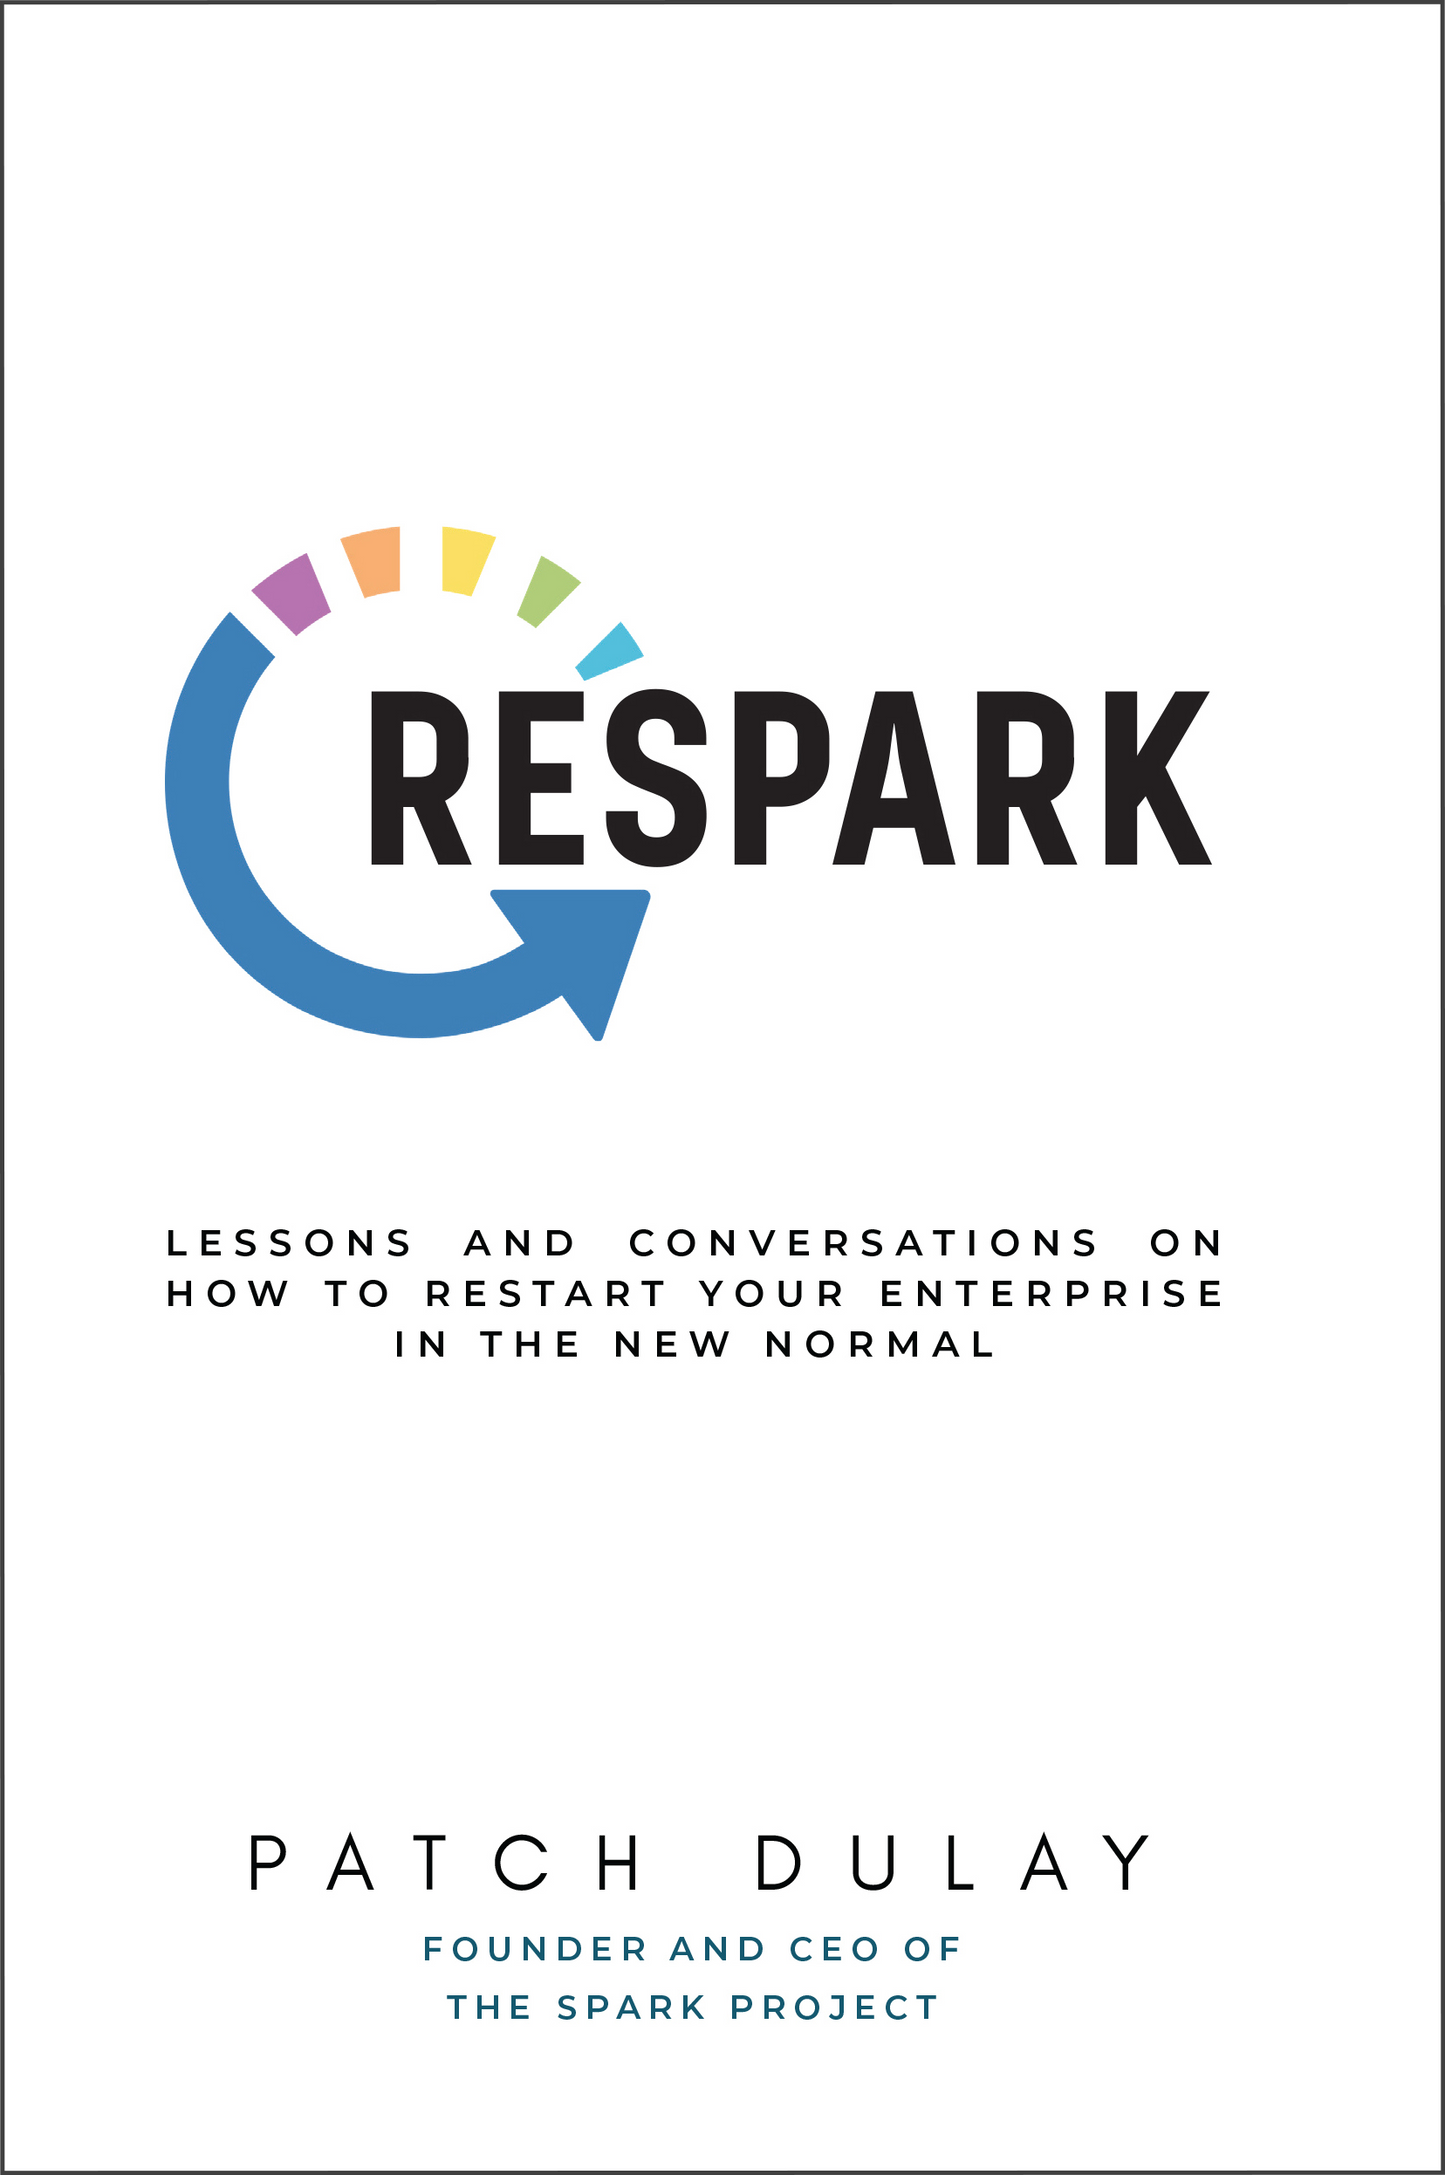 RESPARK: Lessons and Conversations on How to Restart Your Enterprise in the New Normal